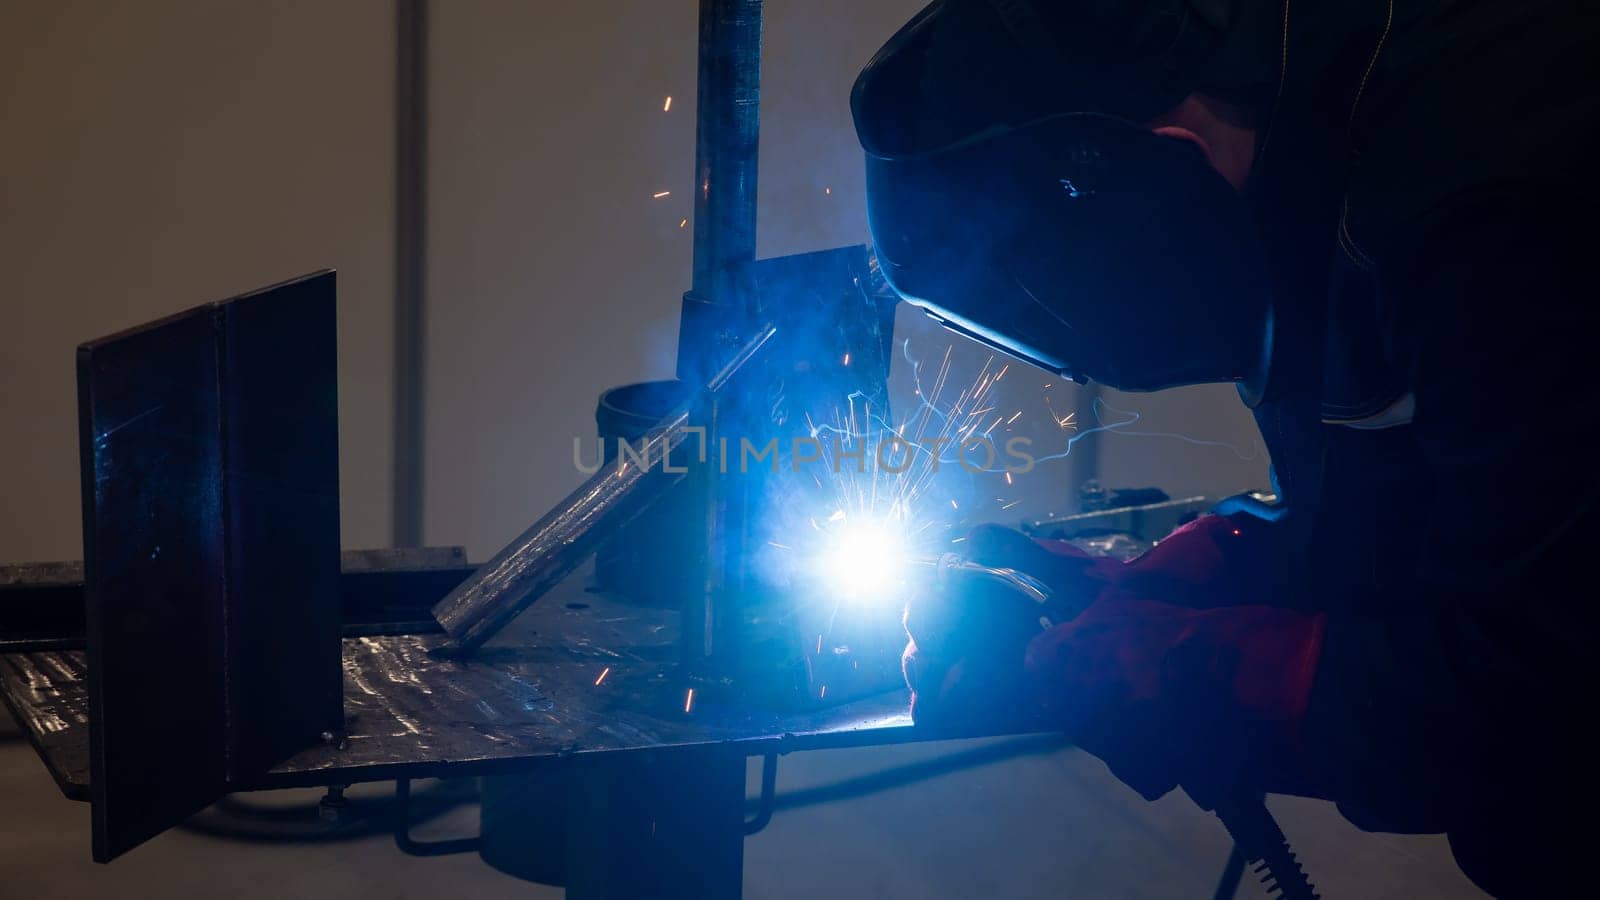 Competitions among welders. A man in a protective mask is welding